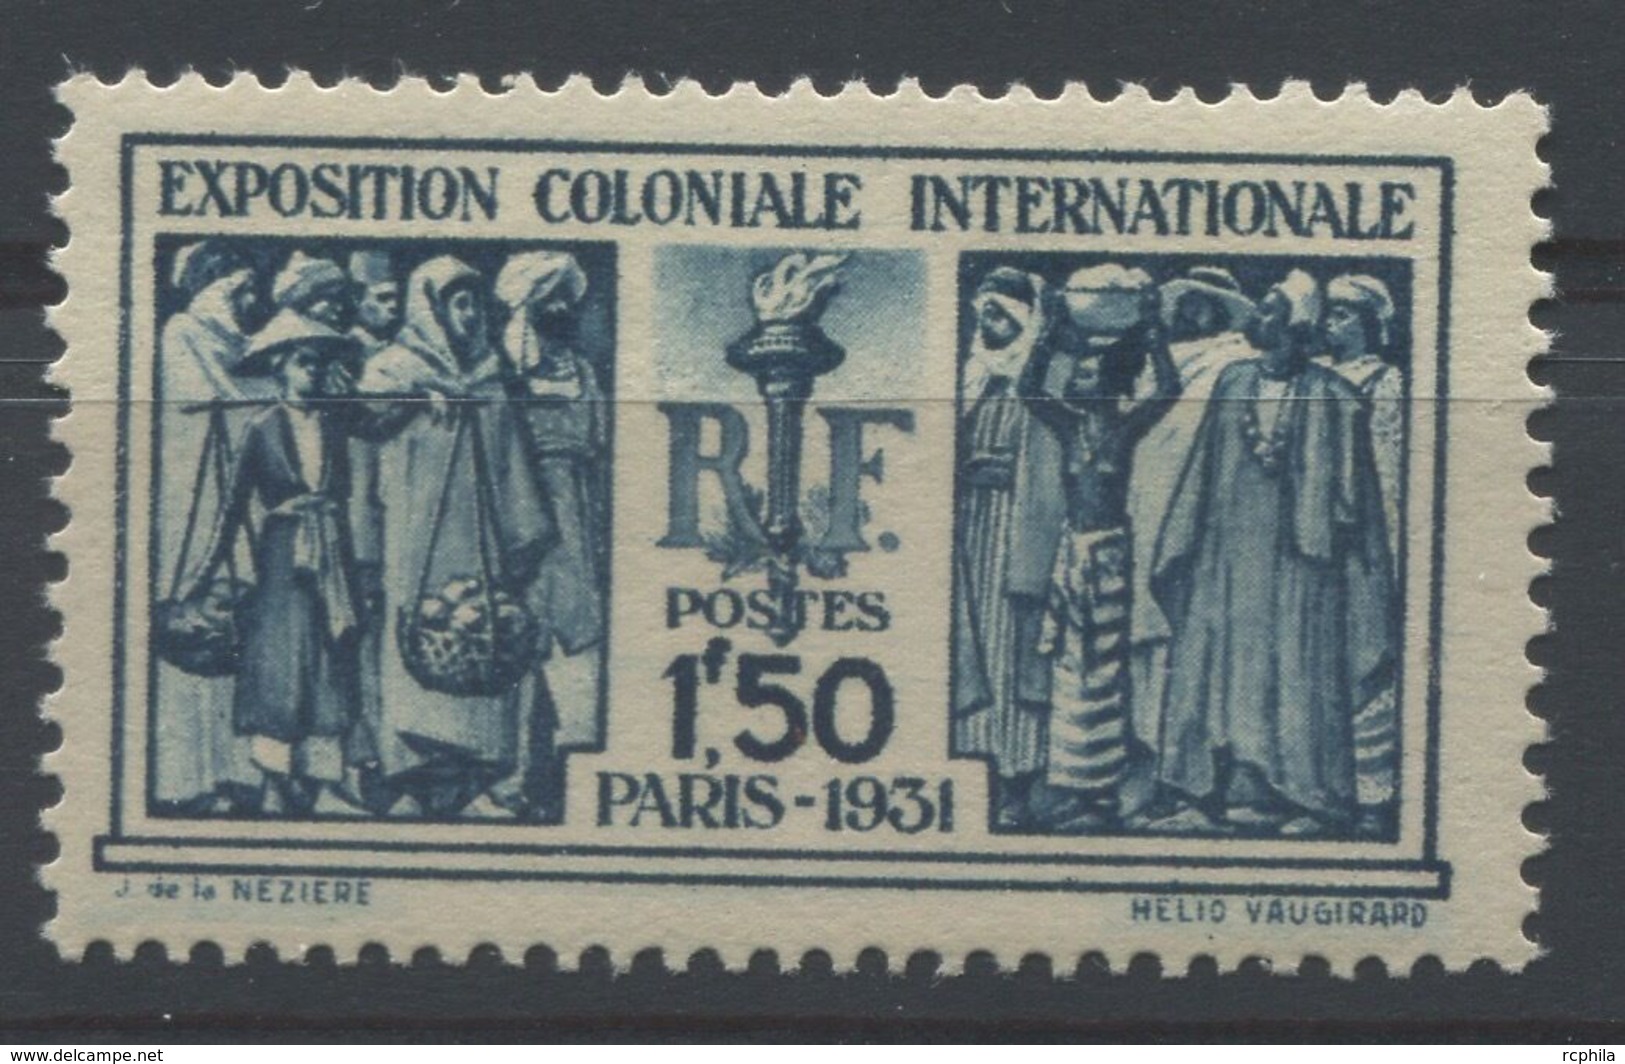 RC 15848 FRANCE N° 274 COTE 110€ - 1F50 BLEU EXPOSITION COLONIALE NEUF ** MNH TB - Unused Stamps